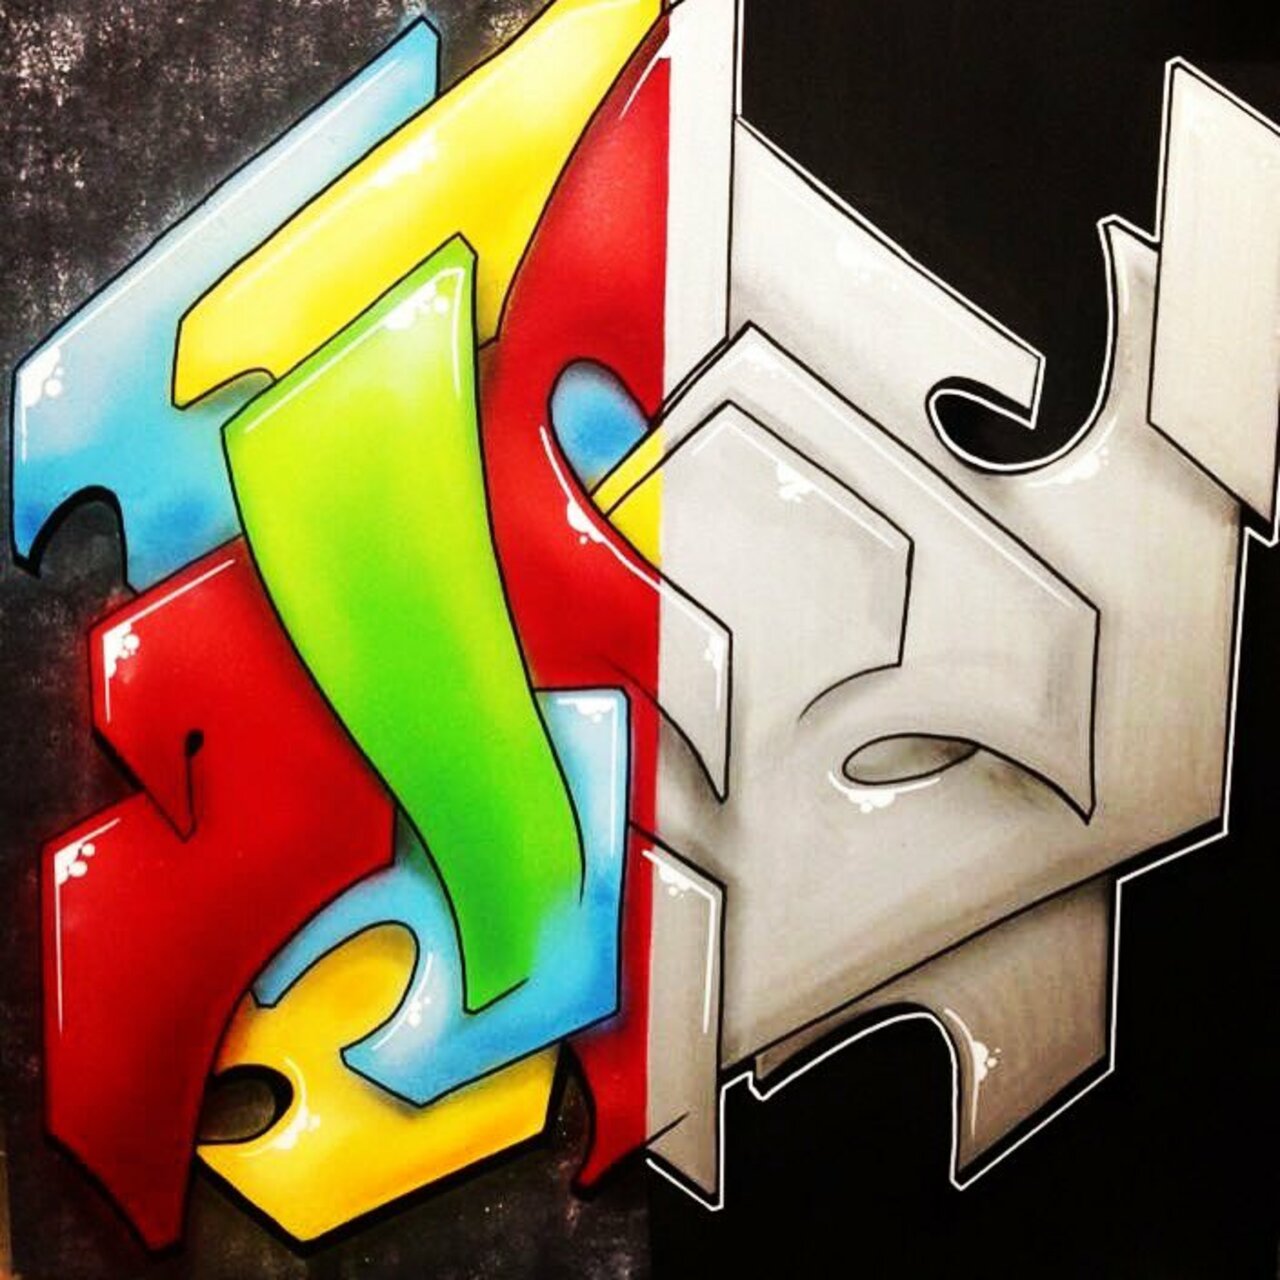 #djéone #graffiti #streetart #Chrome #couleur #canvas #toile #tag  #schlagerrendezvous#art3f https://t.co/OWgxEOWRwI